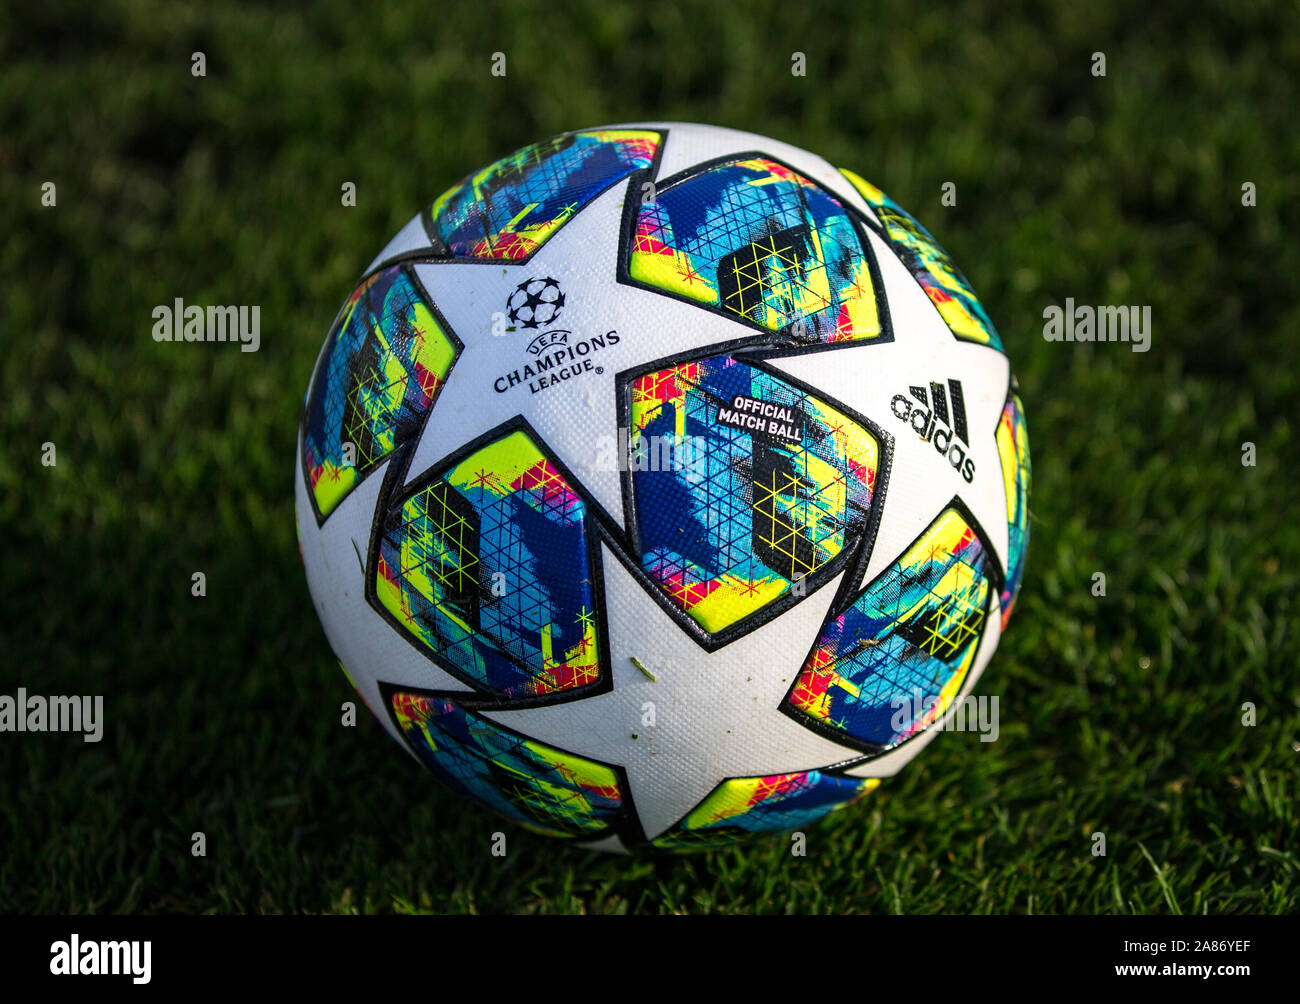 Adidas 2020 Finale Champions League Official Match Ball during the UEFA  Youth League group match between Chelsea U19 and Ajax U19 at the Chelsea  Training Ground, Cobham, England on 5 November 2019.